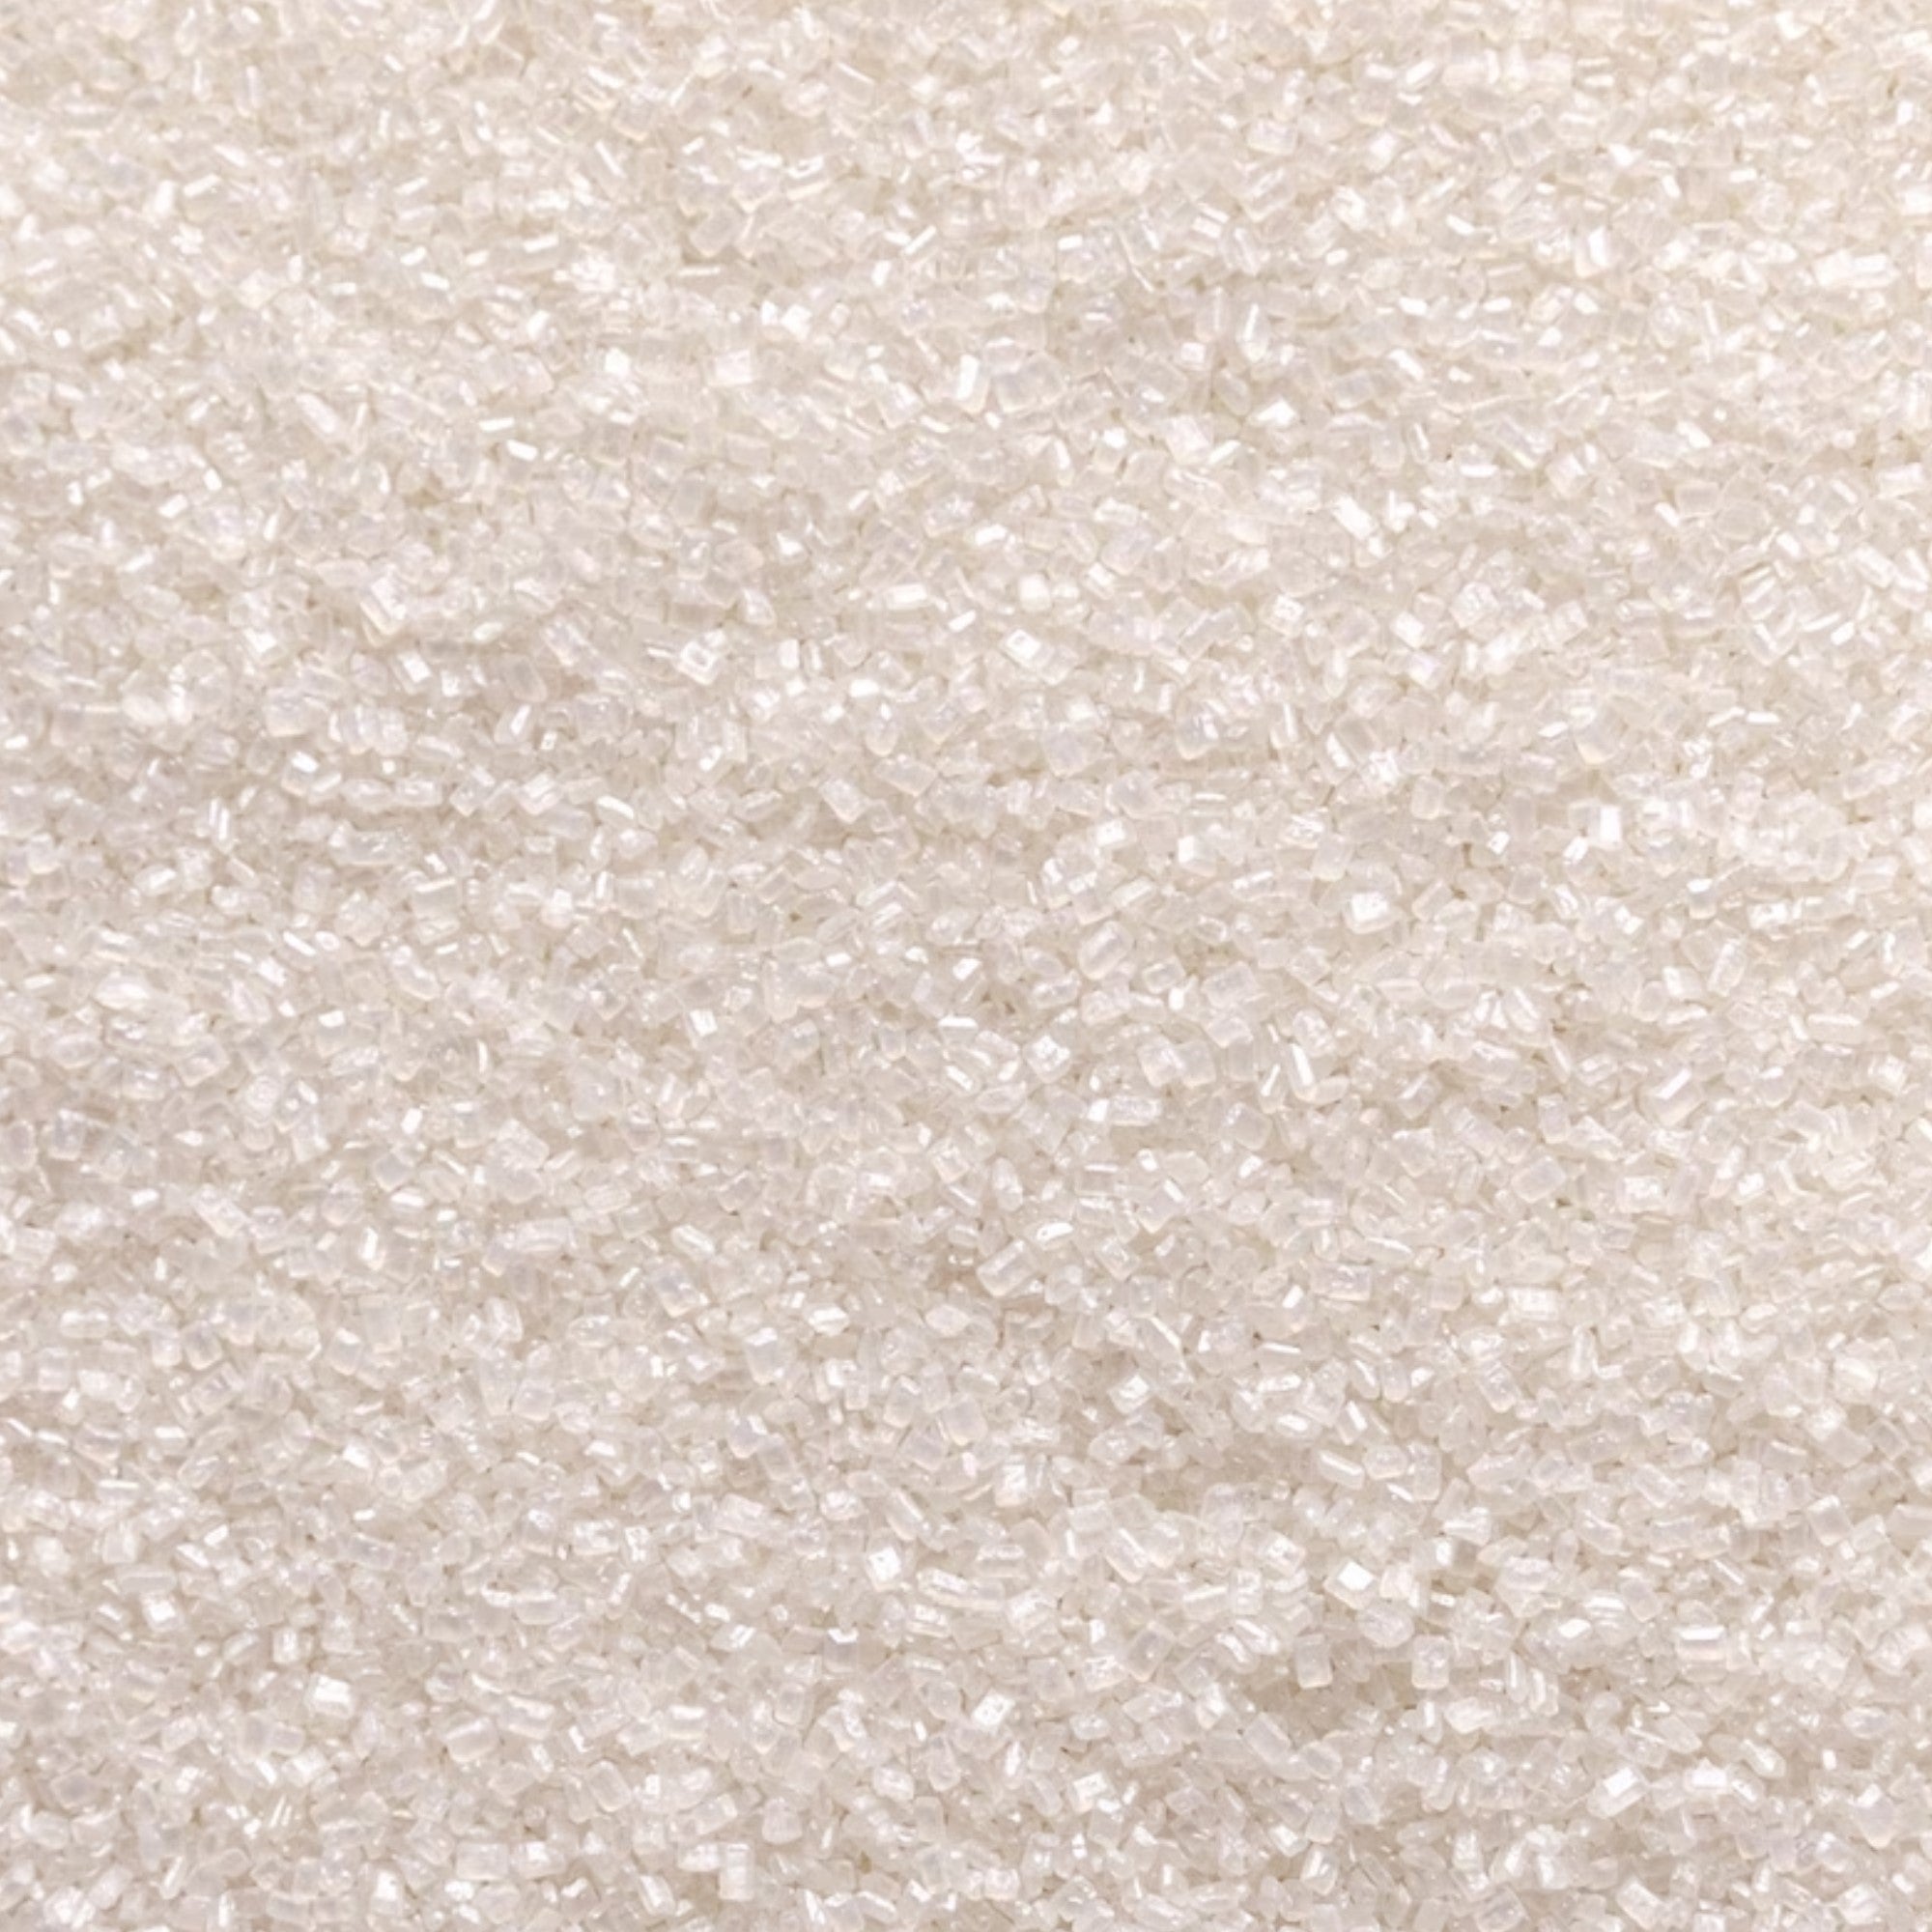 White Sugar Sparkling Crystals Cake / Cupcake Sprinkles Toppers Decorations